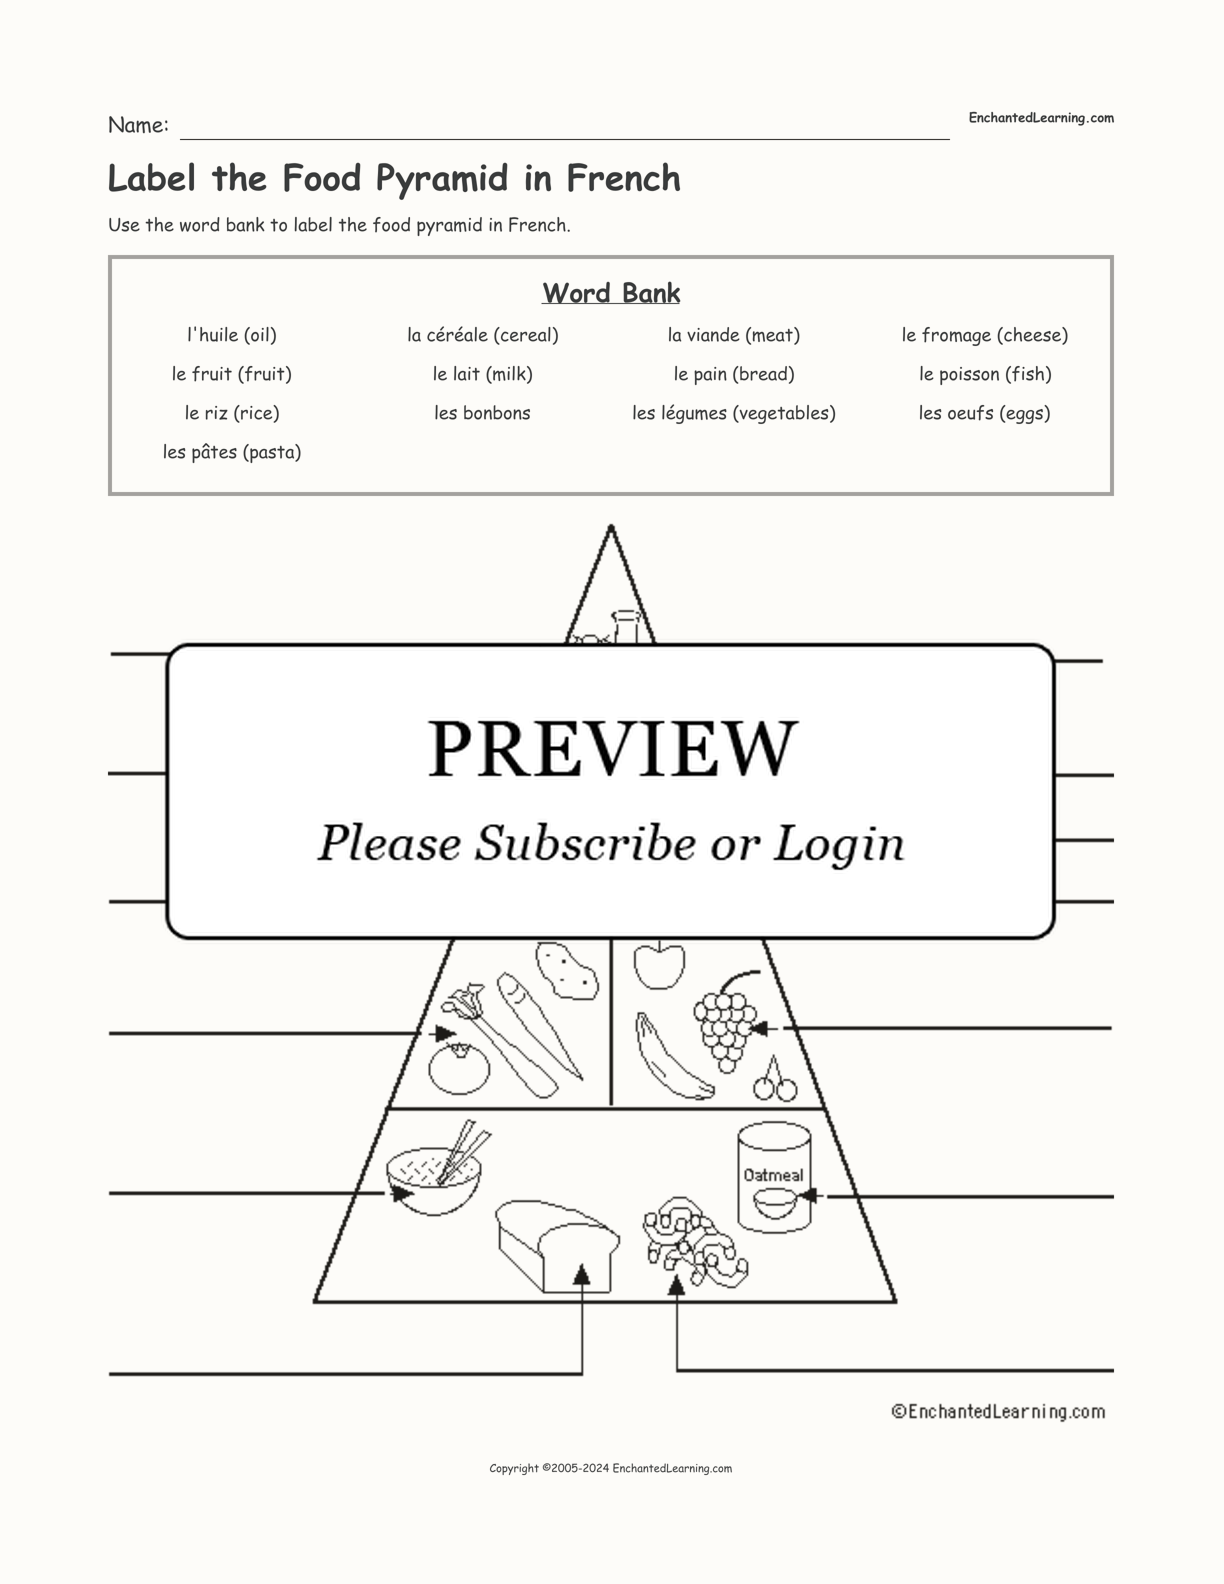 Label the Food Pyramid in French interactive worksheet page 1